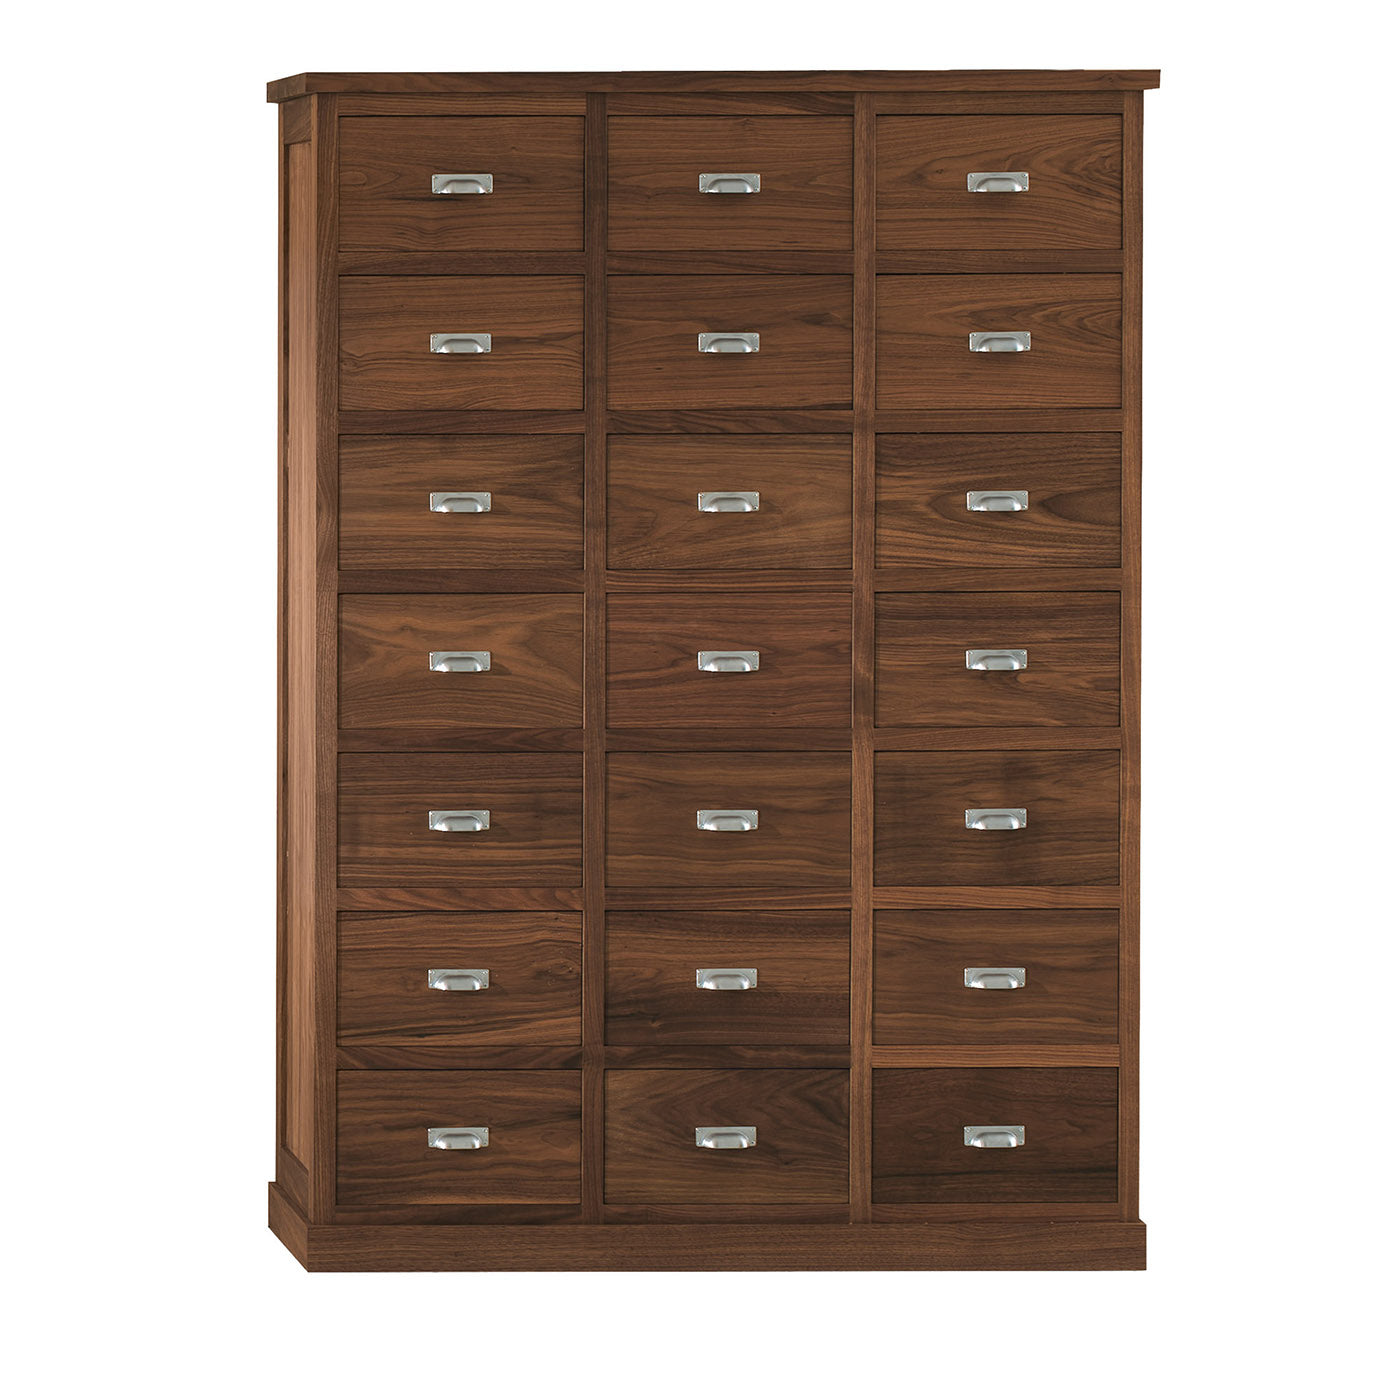 Gastonia 1.01 Walnut Chest of Drawers by C.R. & S. Riva 1920 - Main view